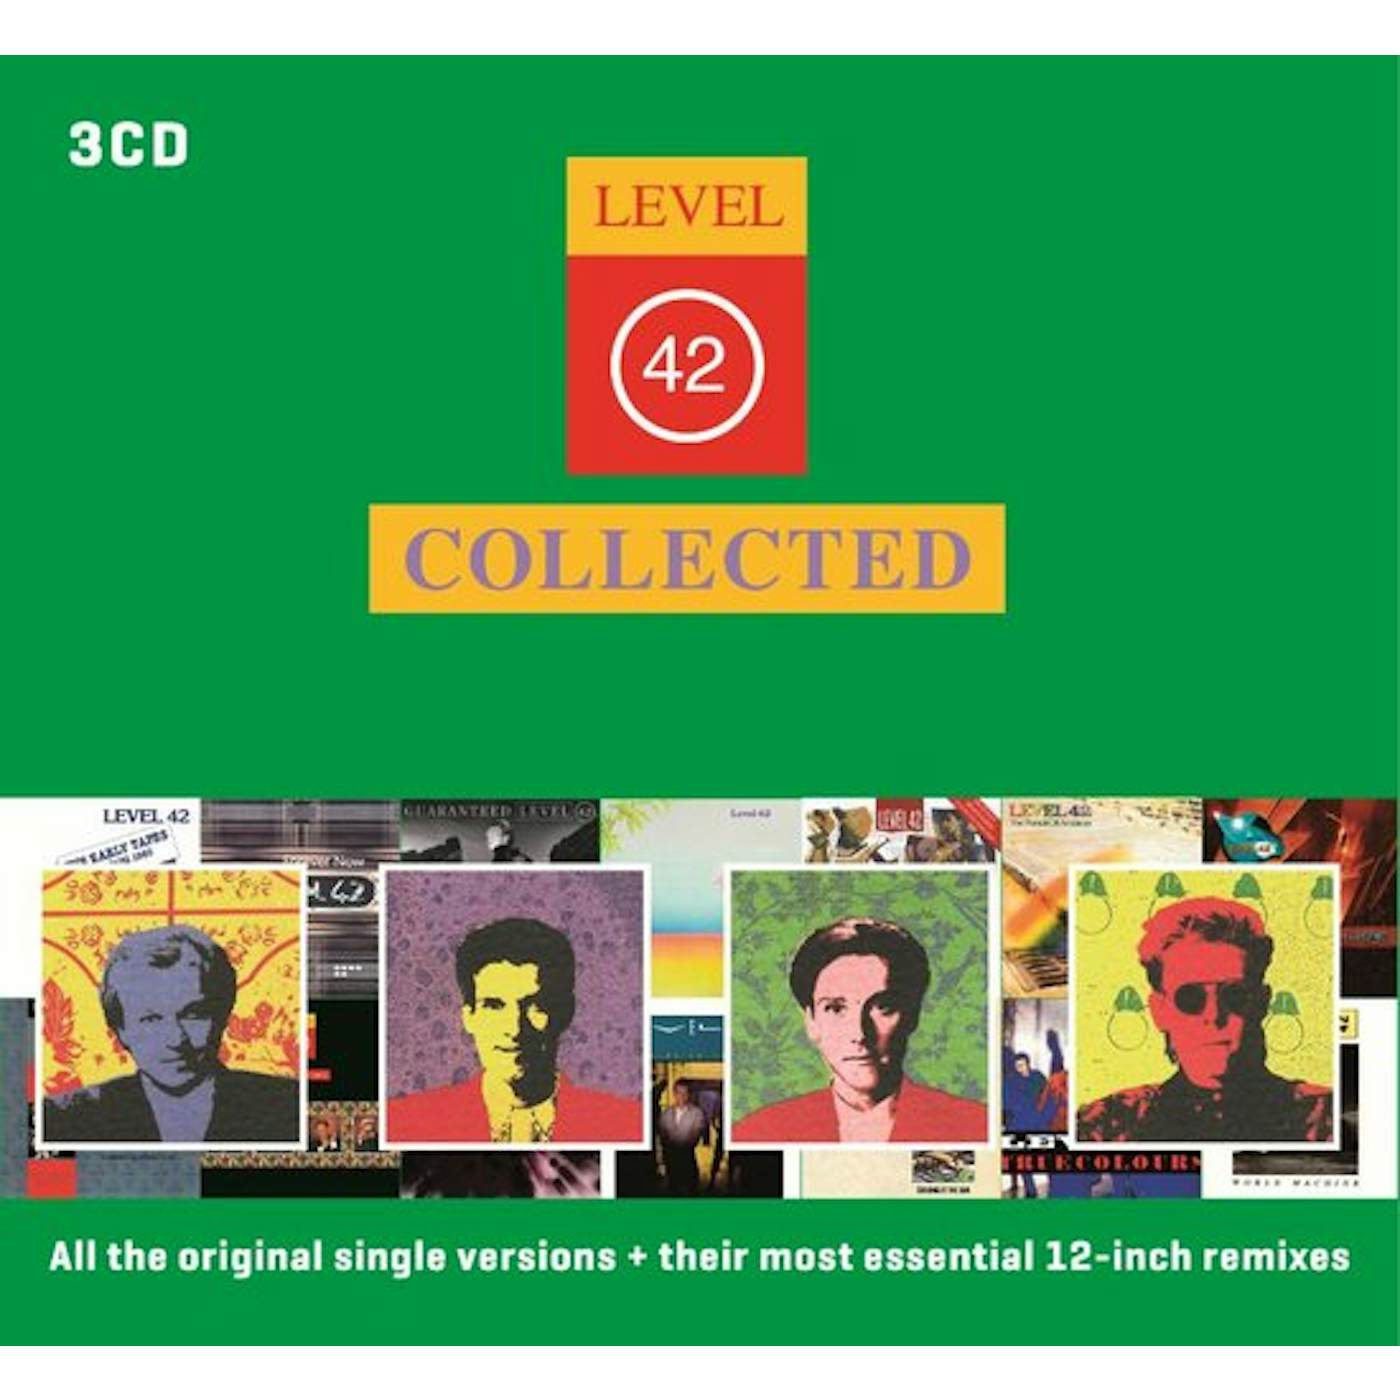 Level 42 COLLECTED CD